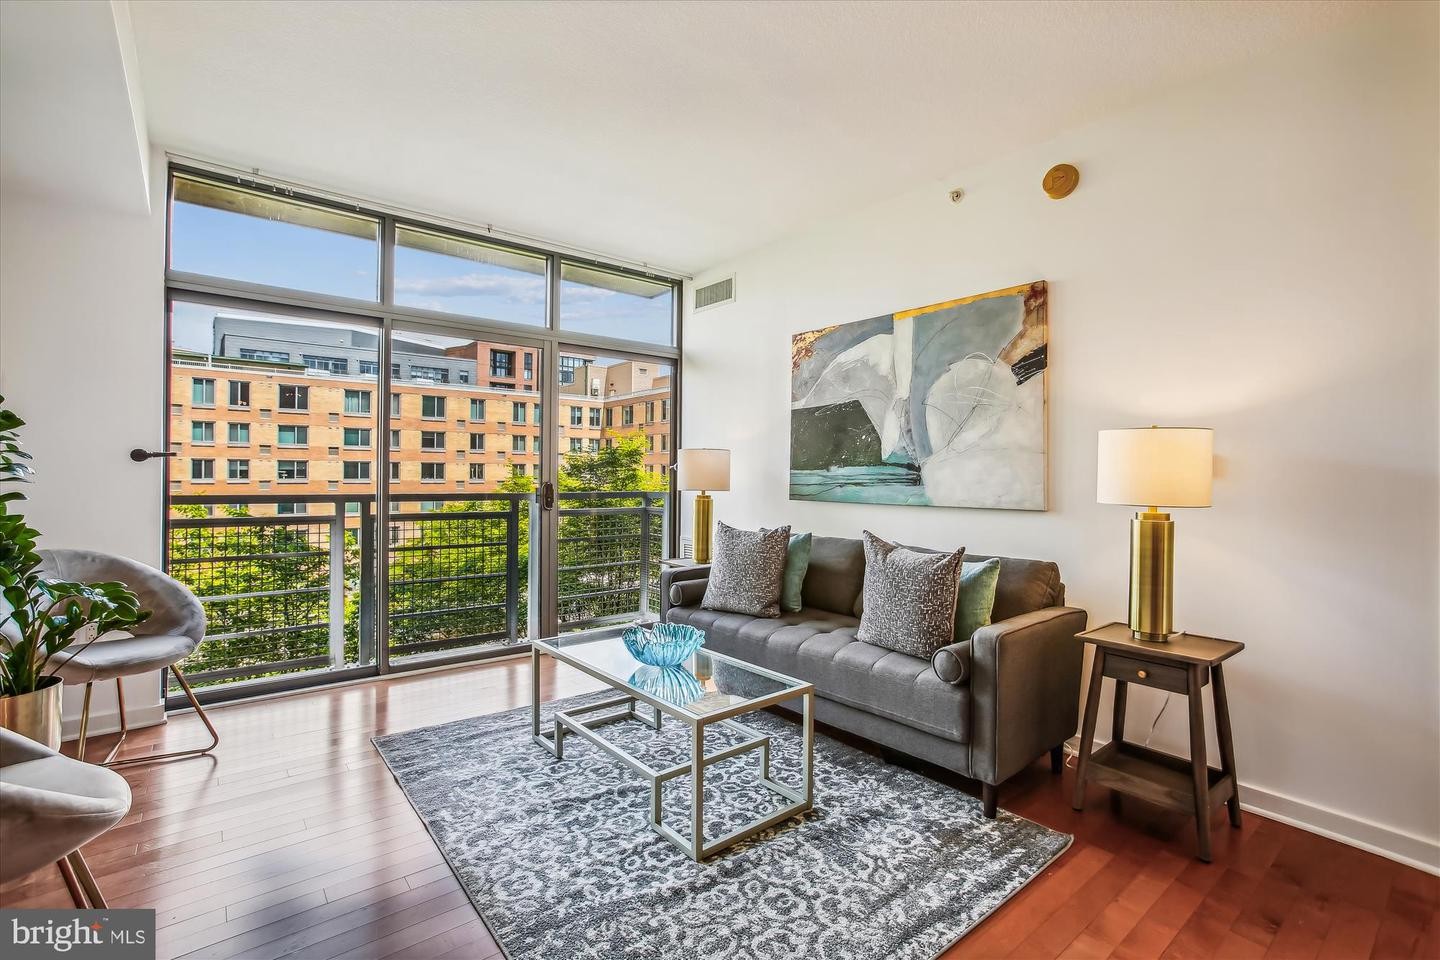 12. 475 K St NW 